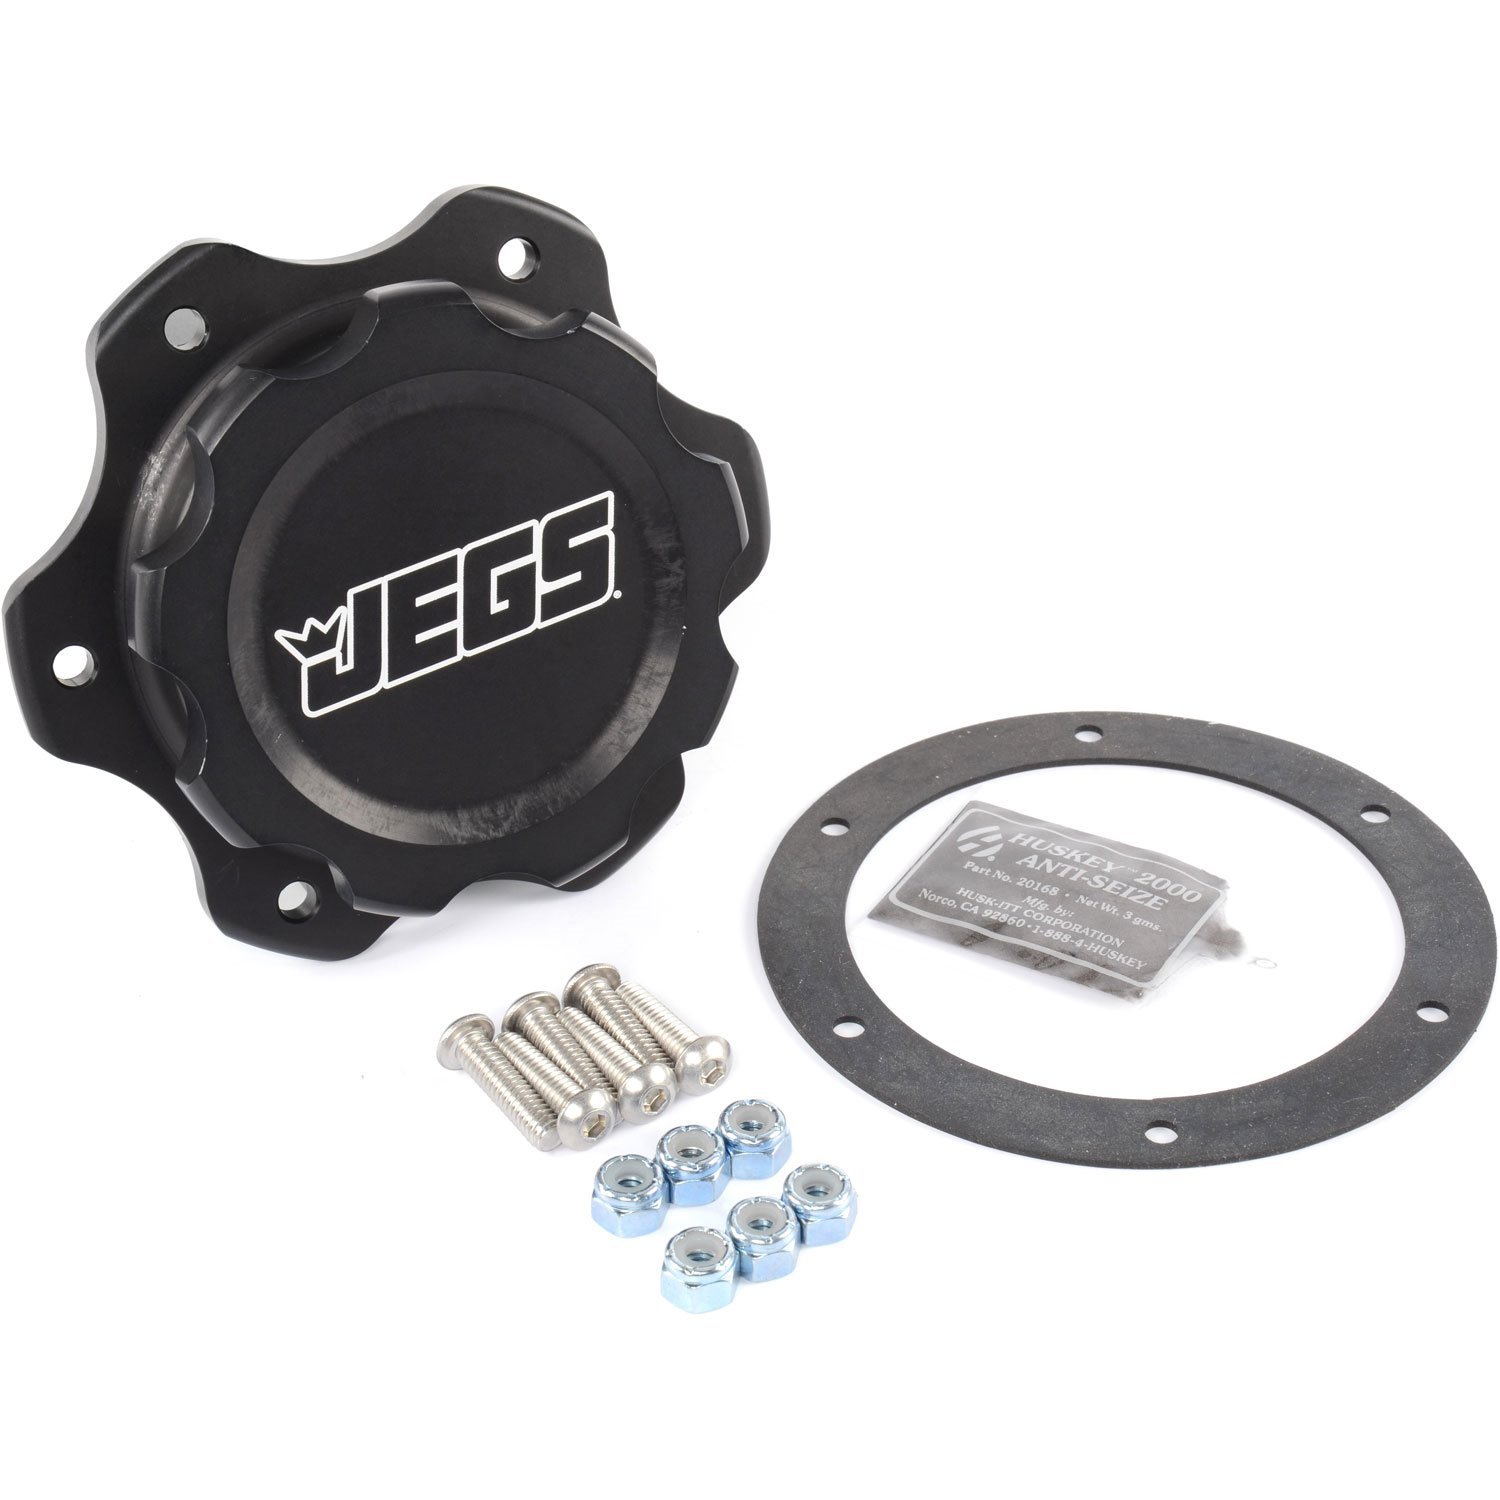 Black Fuel Cell Cap with Bung 6-Bolt Bung